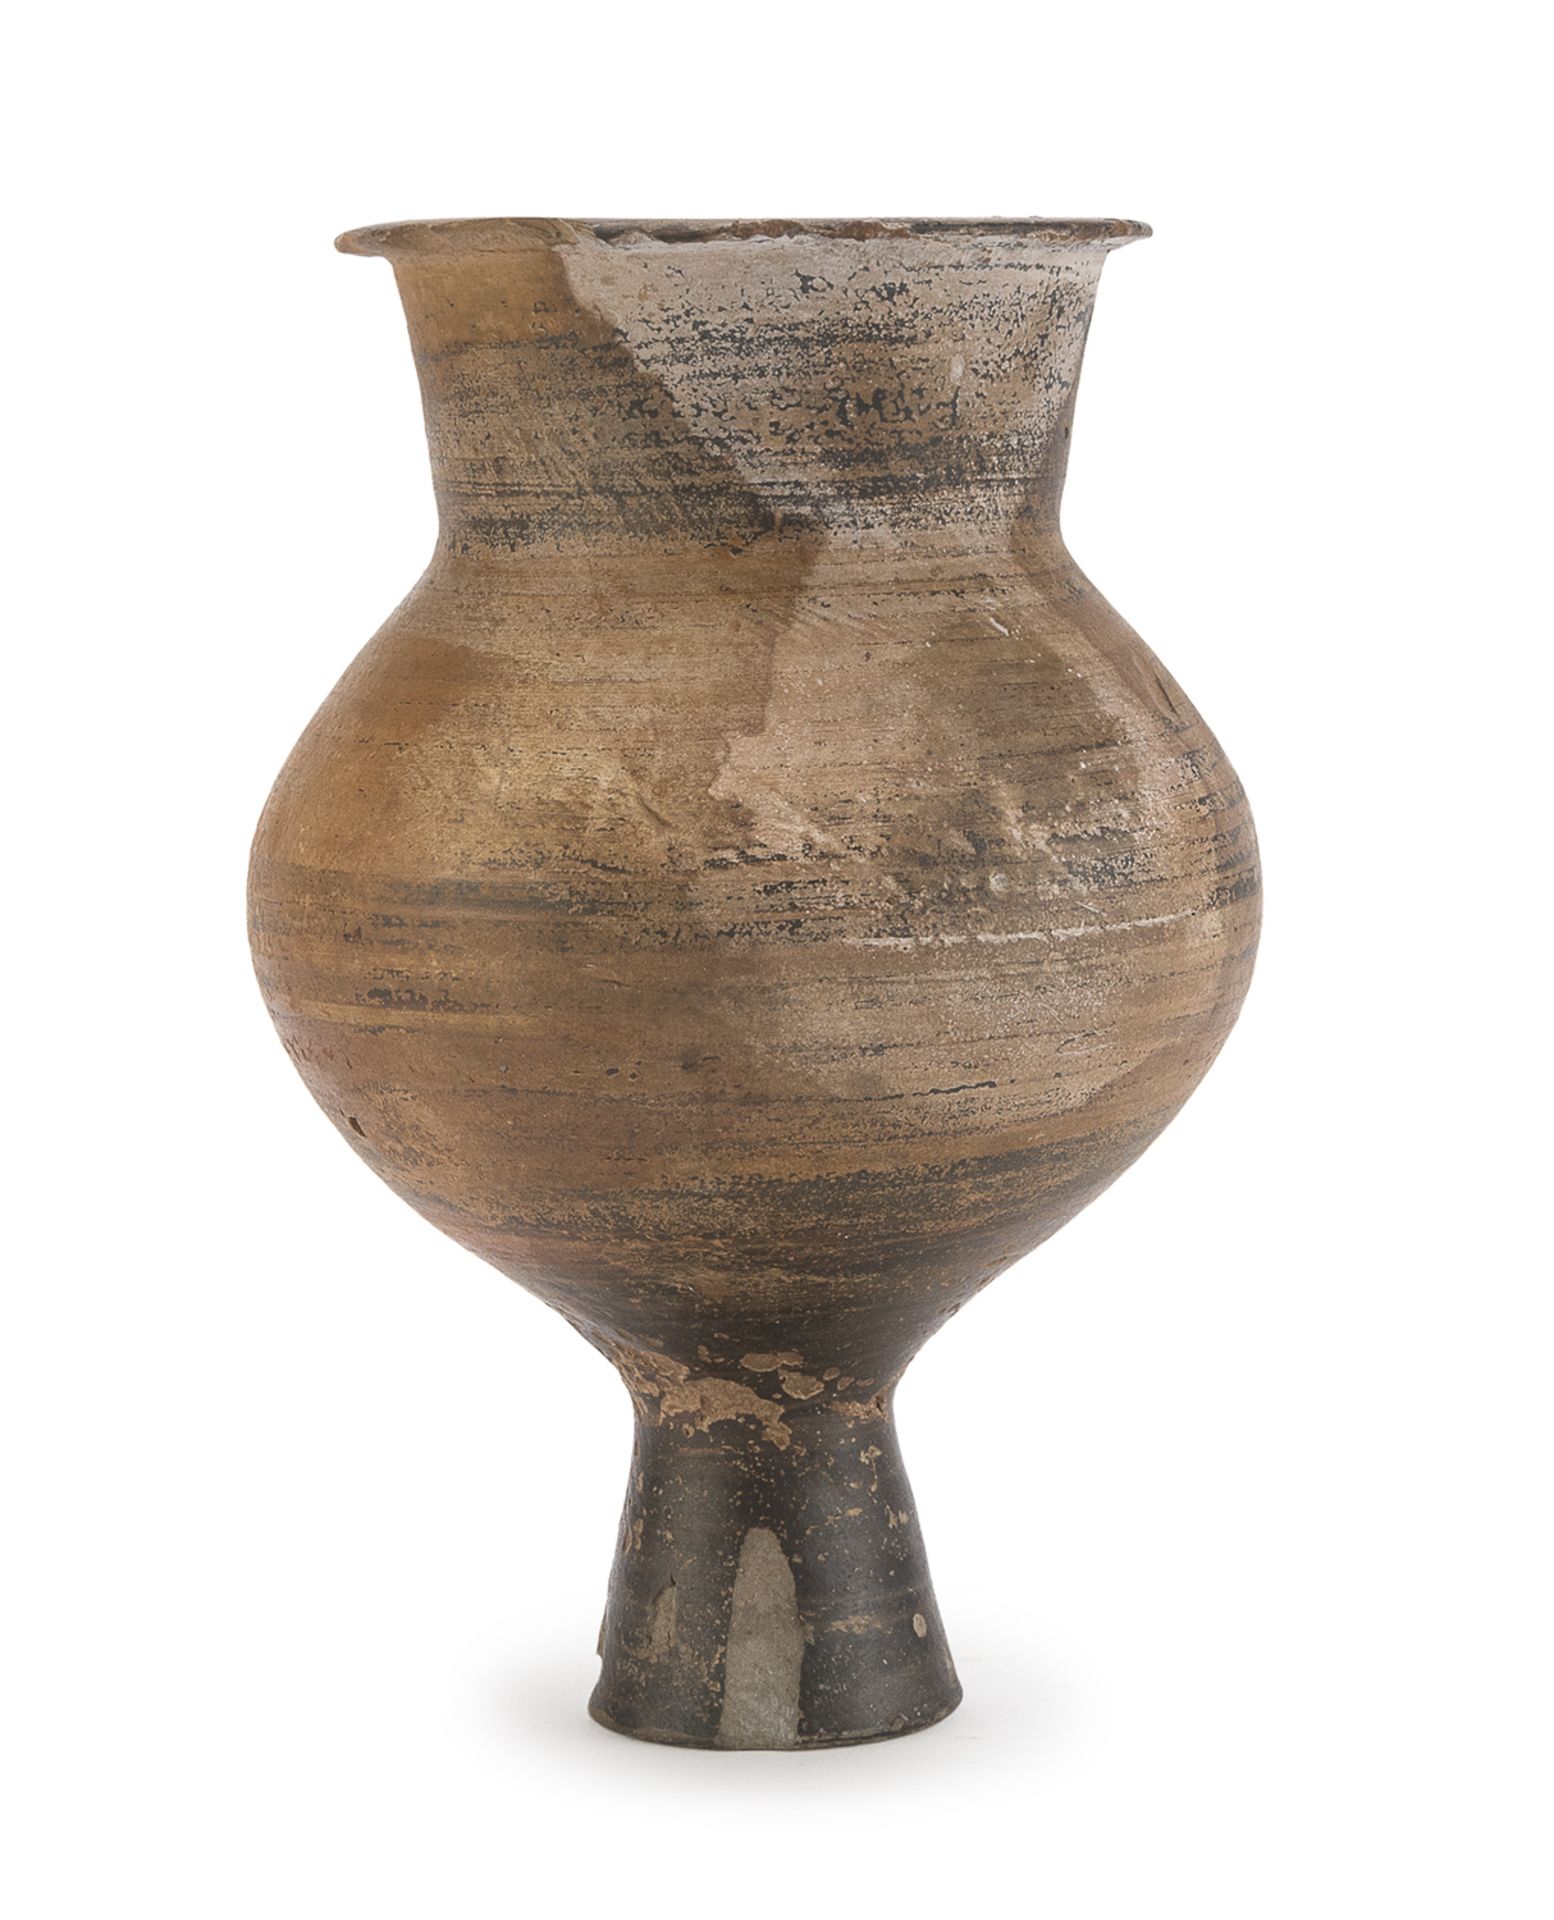 ETRUSCAN OLLA ON HIGH FOOT 7th-4th CENTURY BC